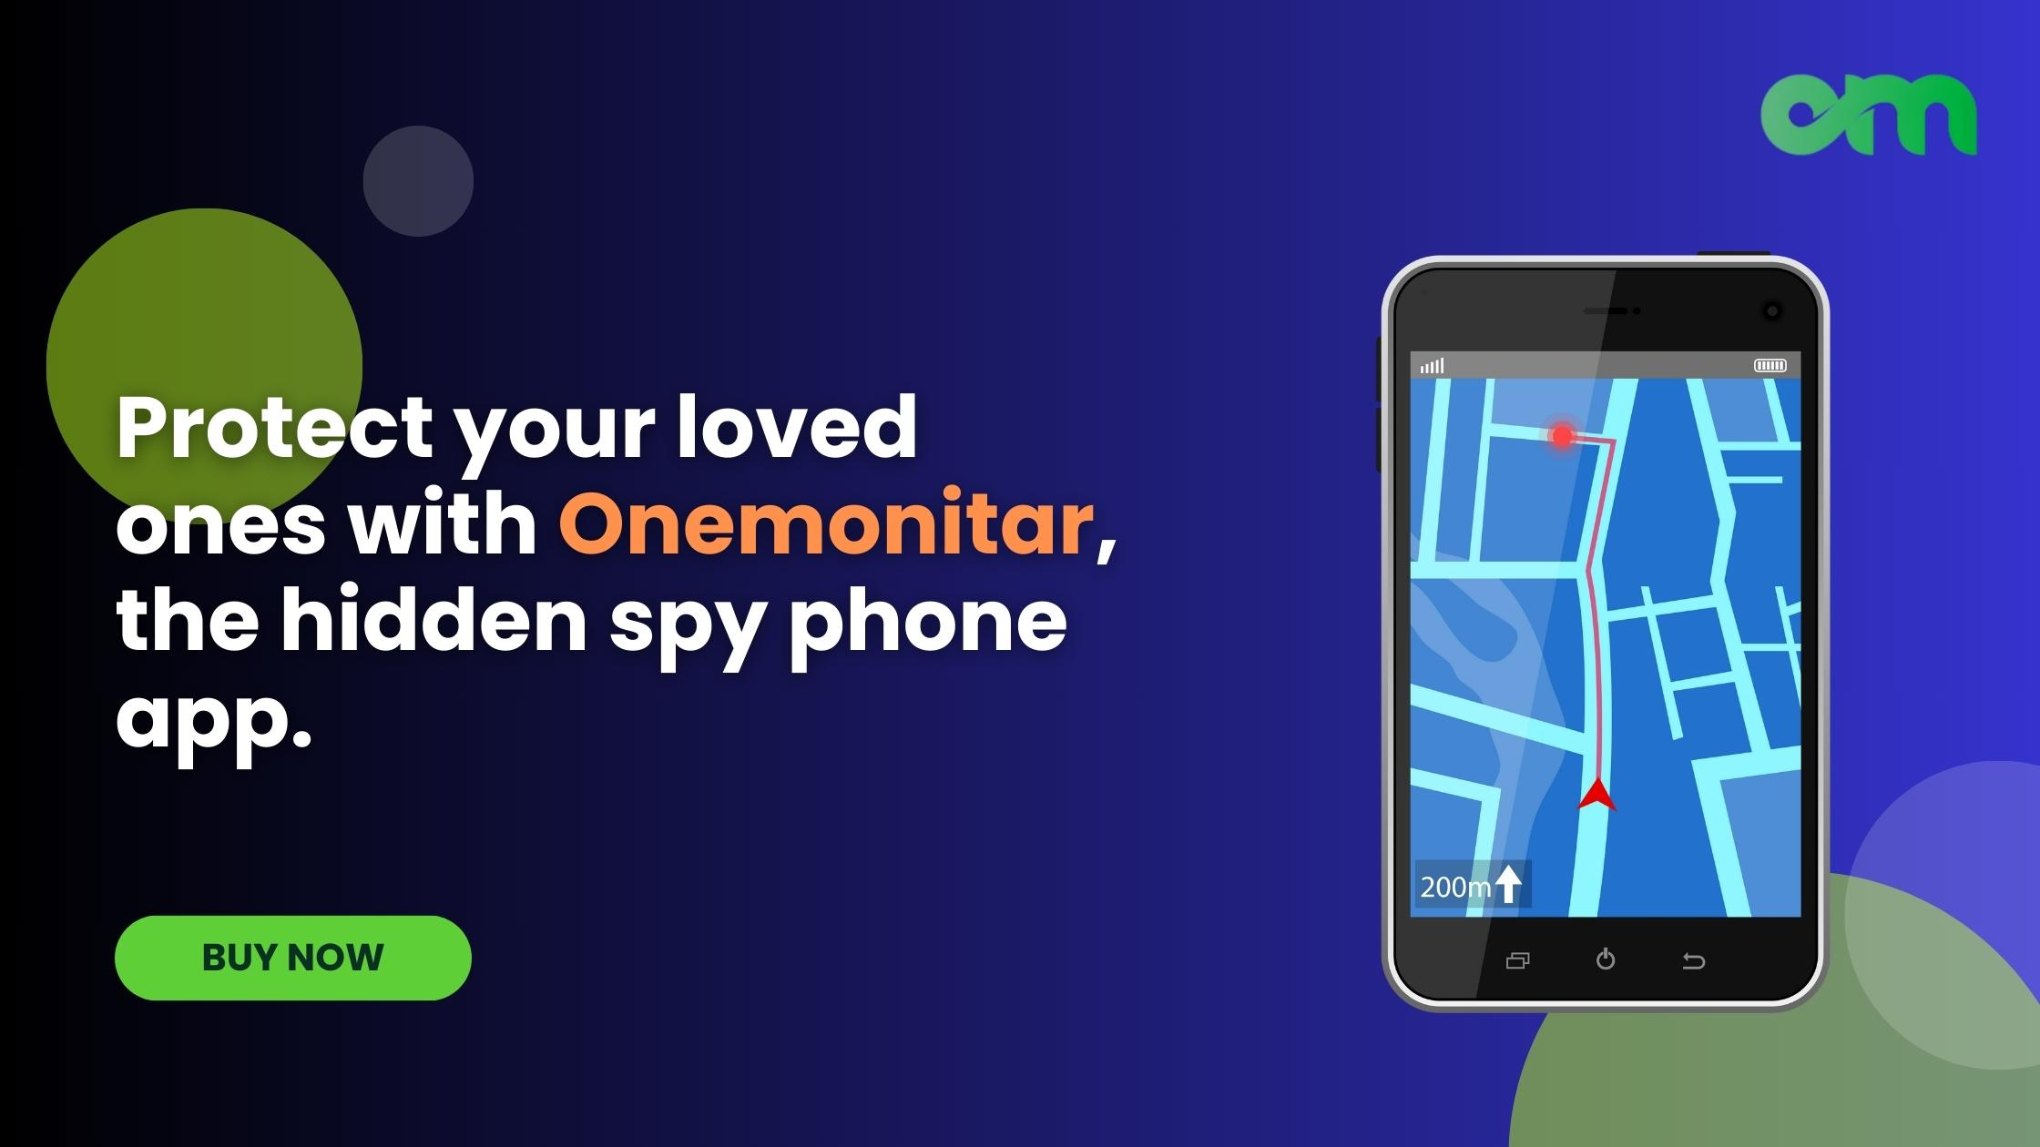 Onemonitar: The Spy Phone App for Protecting Your Loved Ones